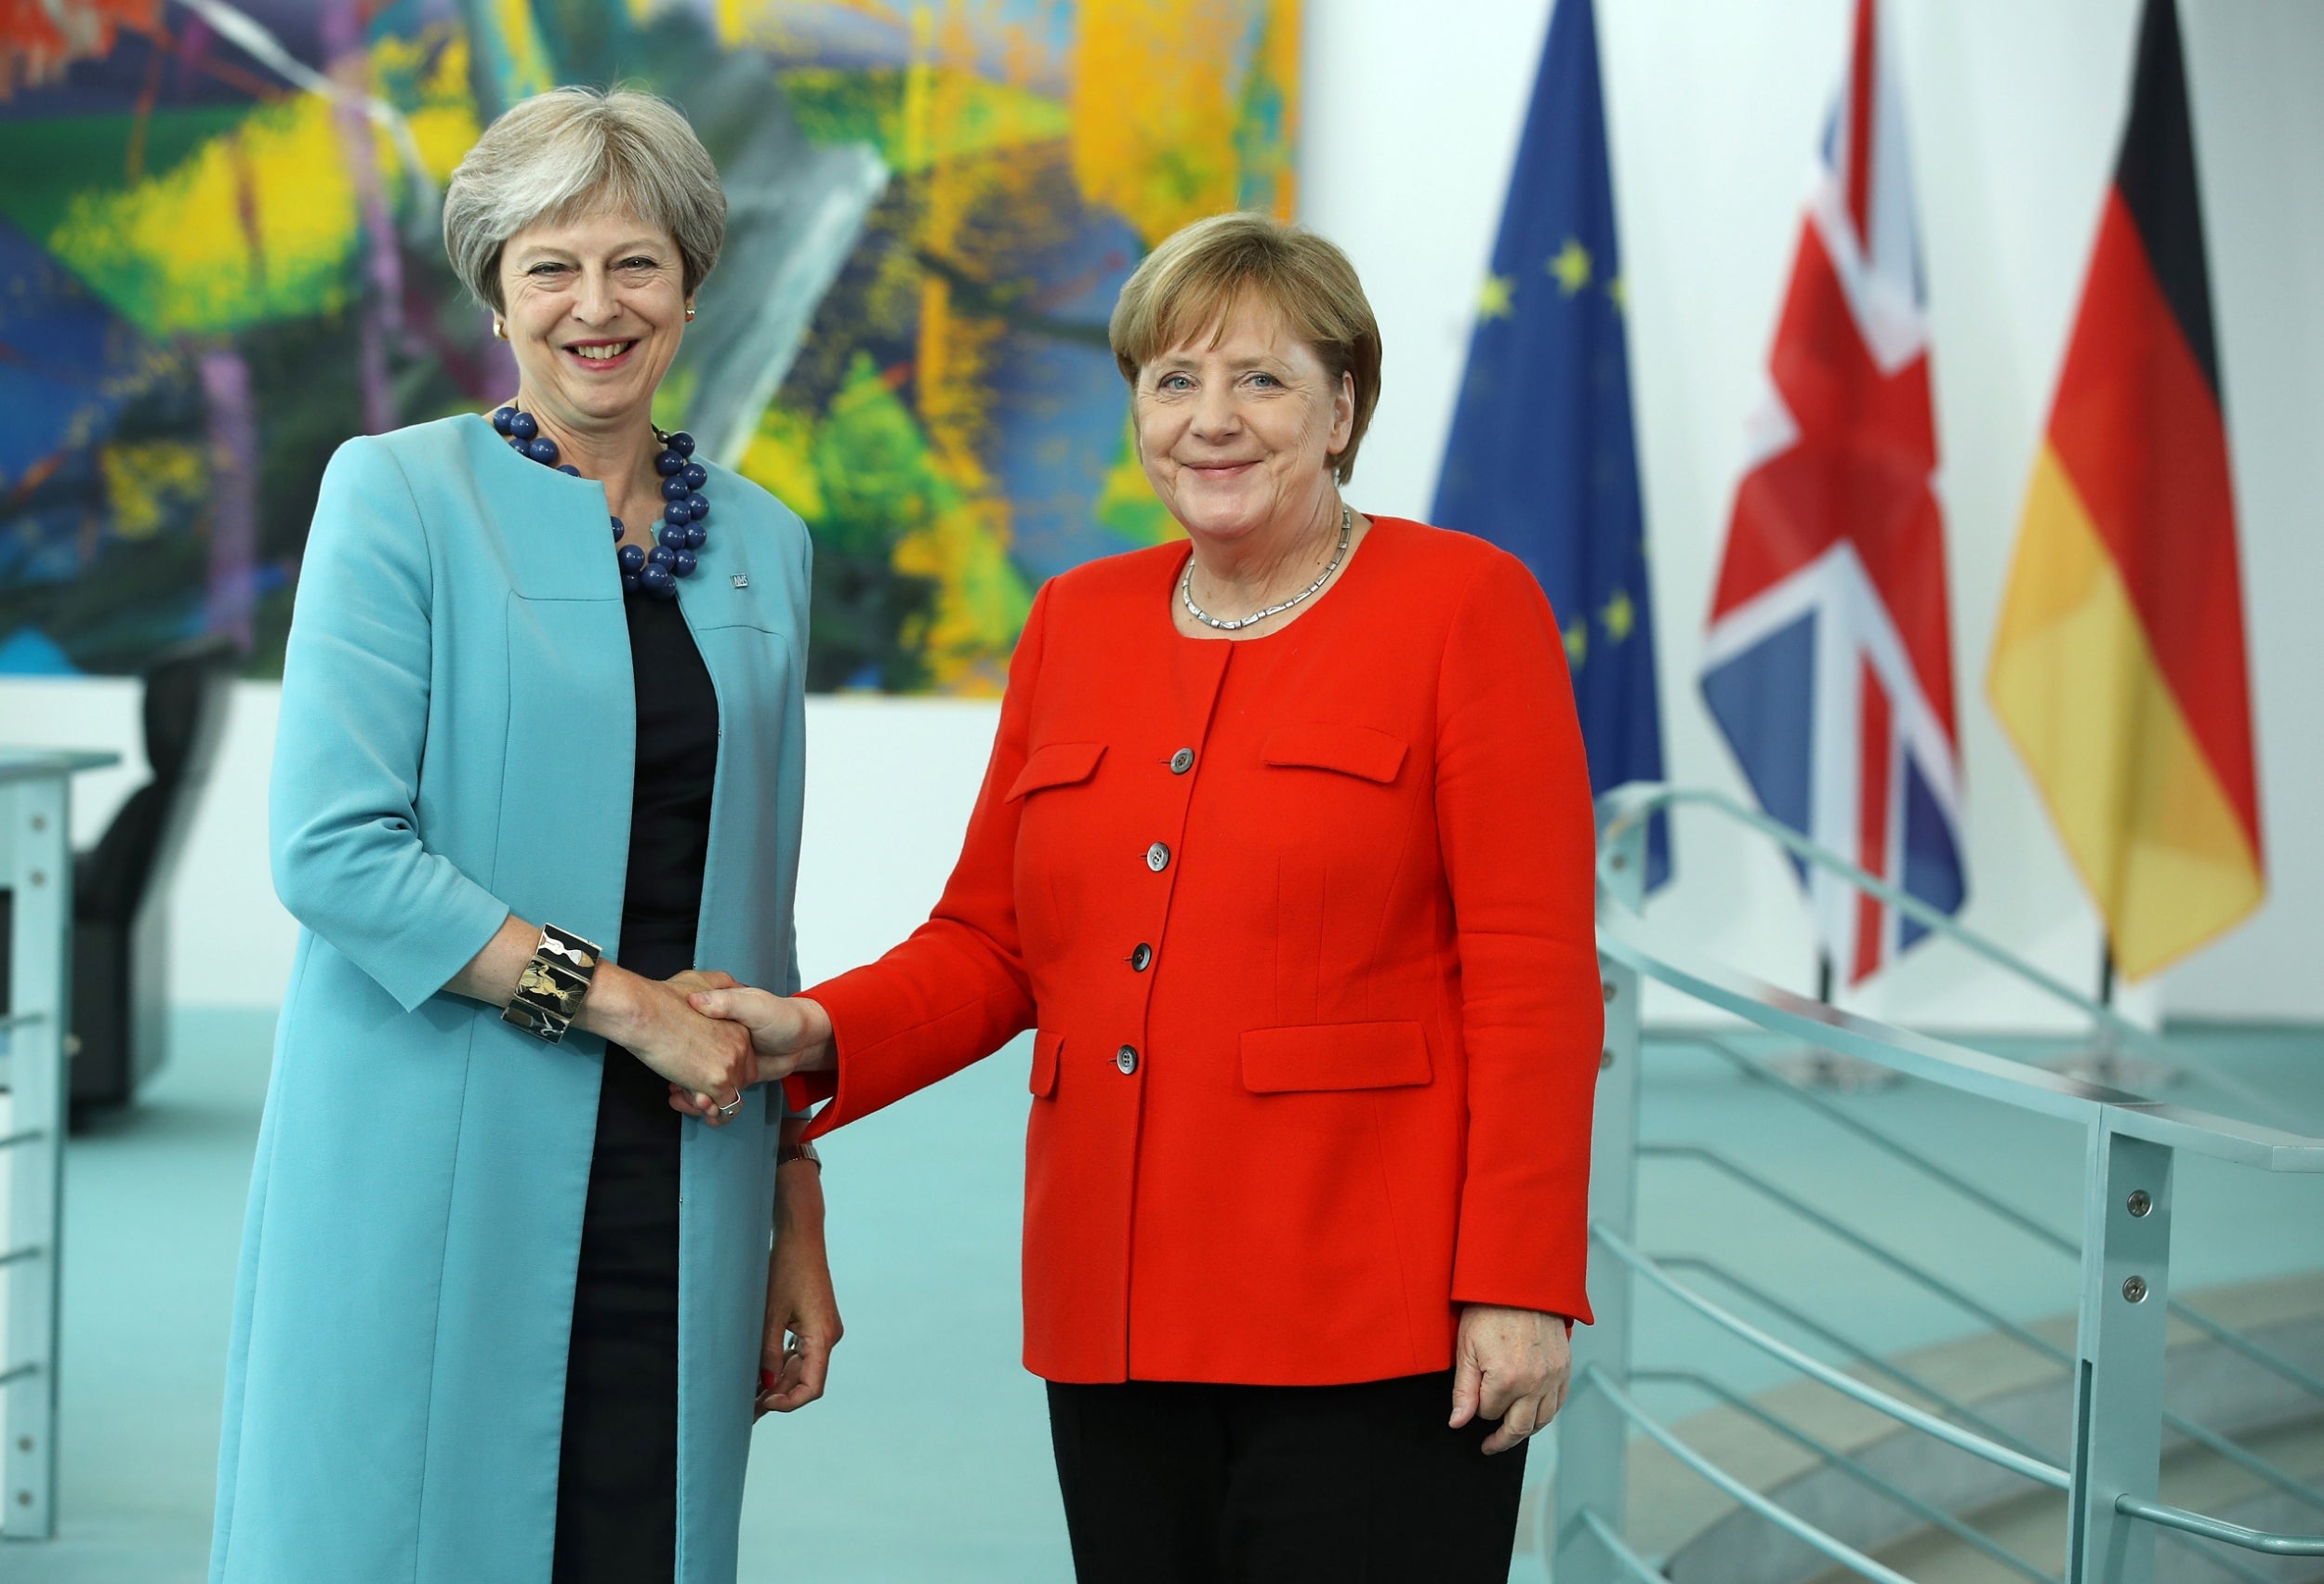 Theresa May shares many traits with the German chancellor